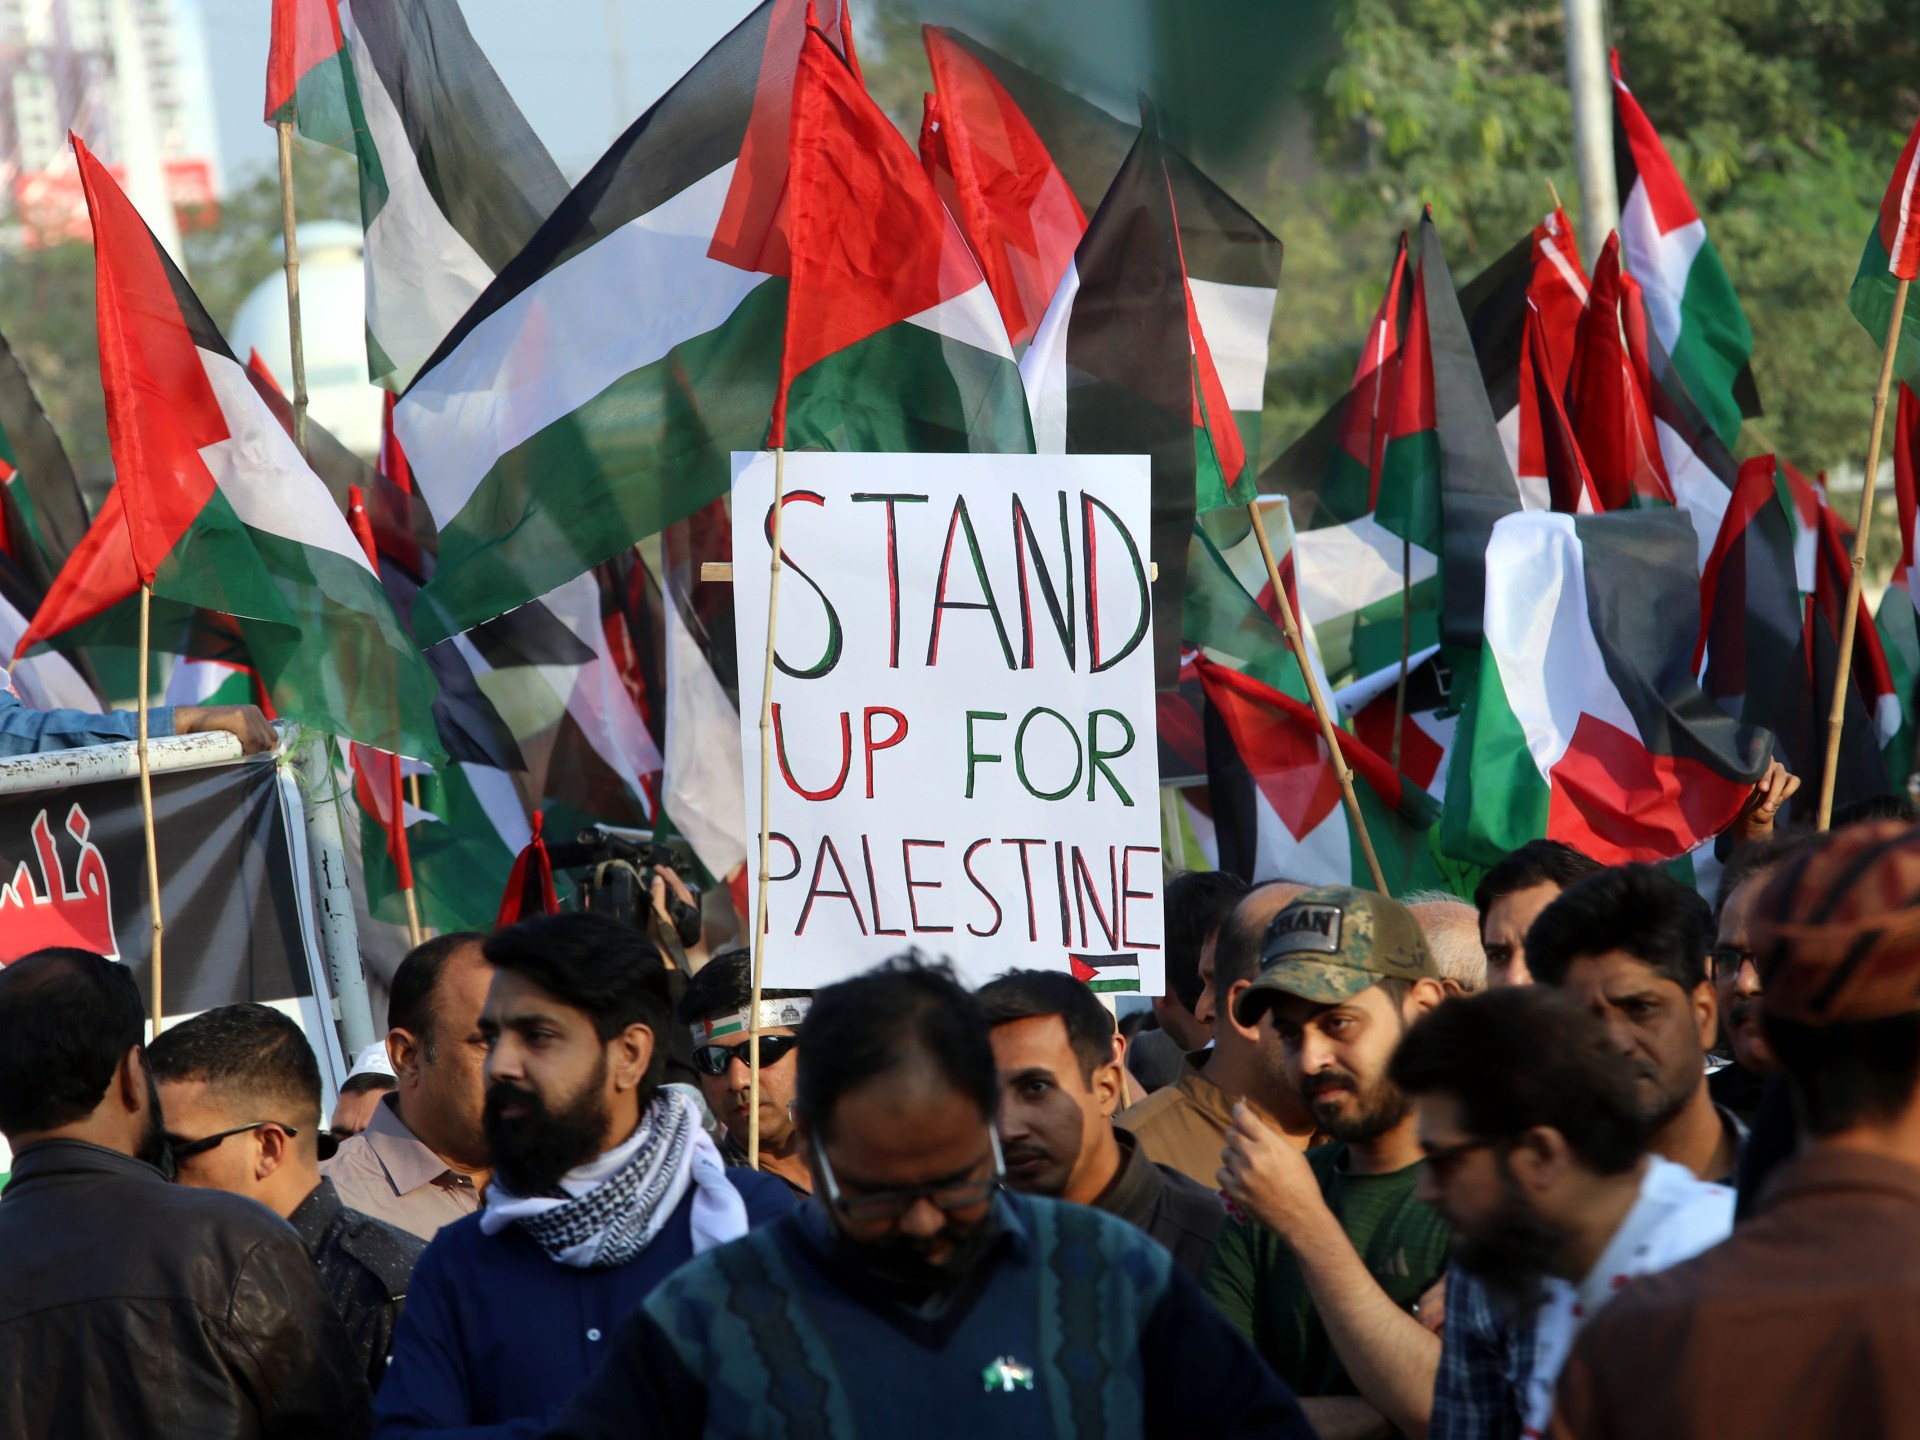 People around the world rally in solidarity with Palestinians | Israel-Palestine conflict News #People #world #rally #solidarity #Palestinians #IsraelPalestine #conflict #News